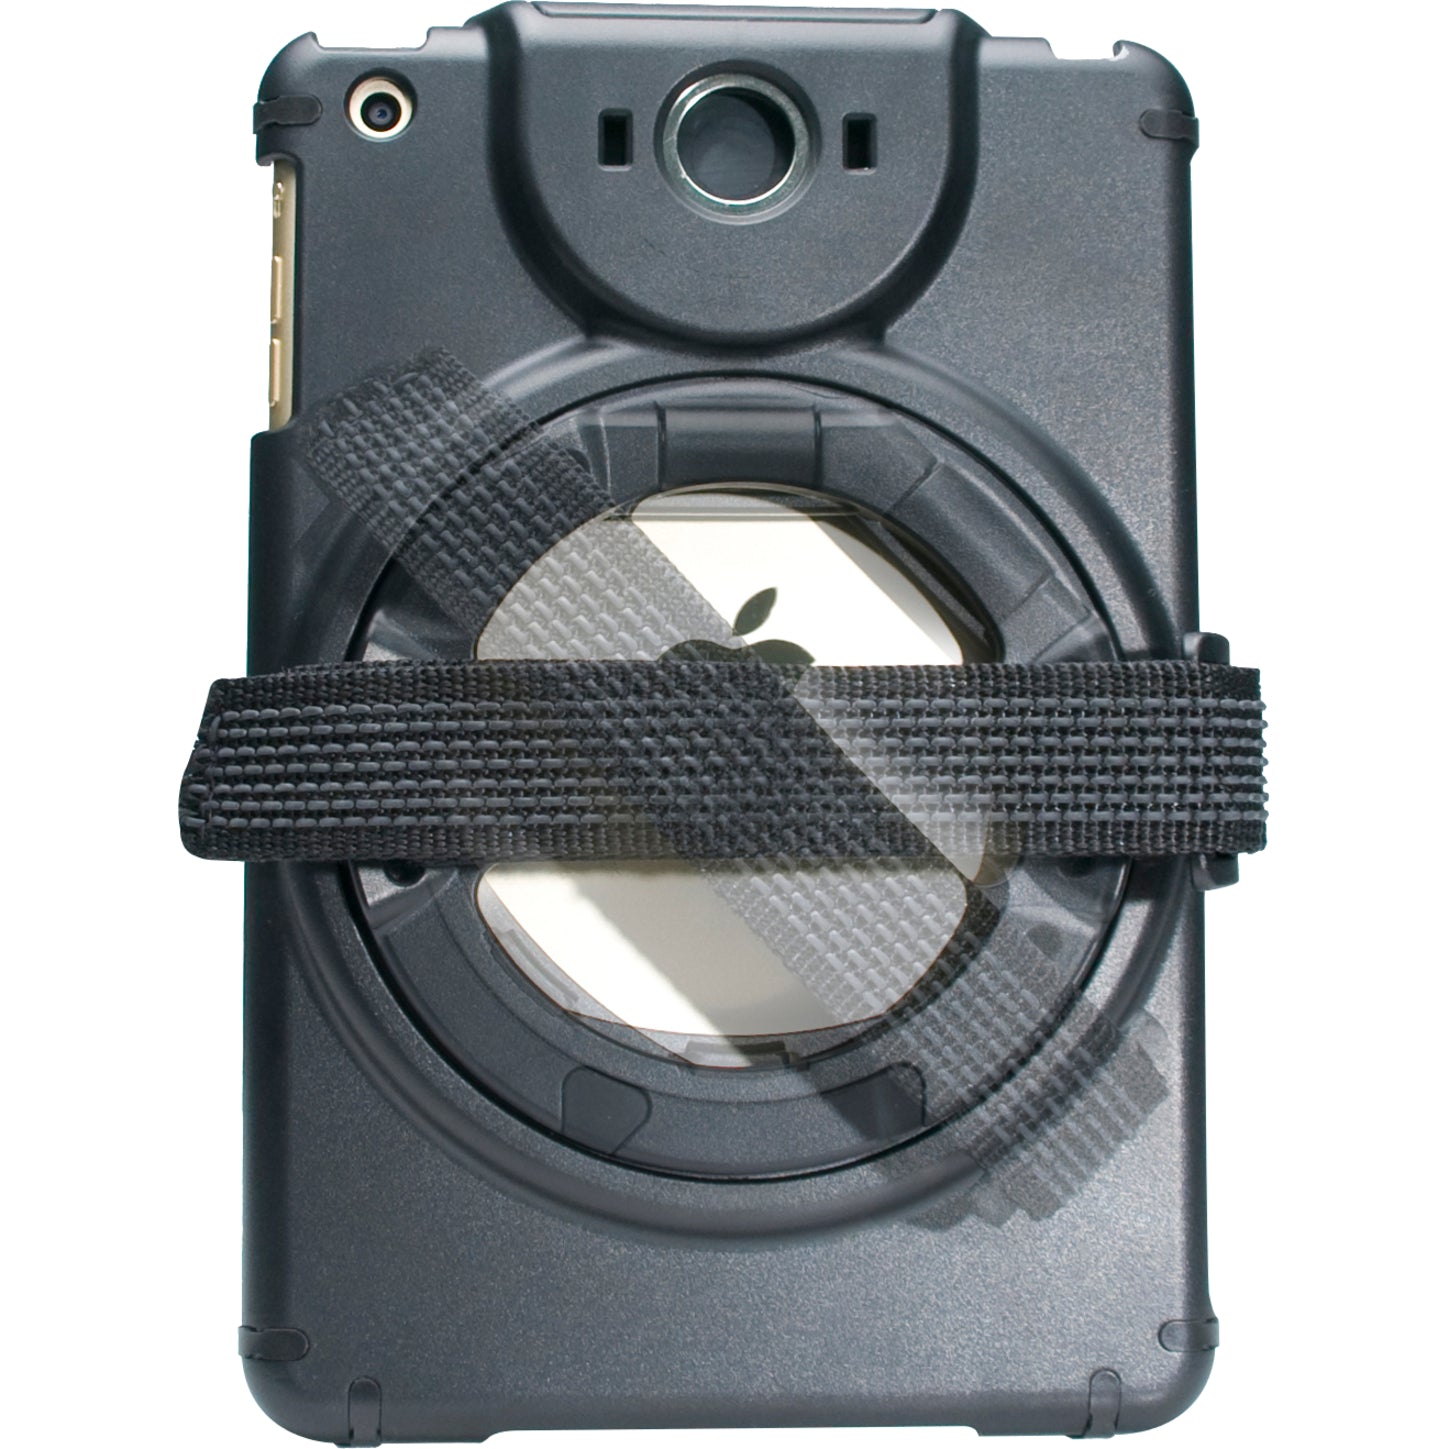 CTA Digital PAD-ACGM Anti-Theft Case with Built-In Grip Stand for iPad mini, Secure and Convenient Protection